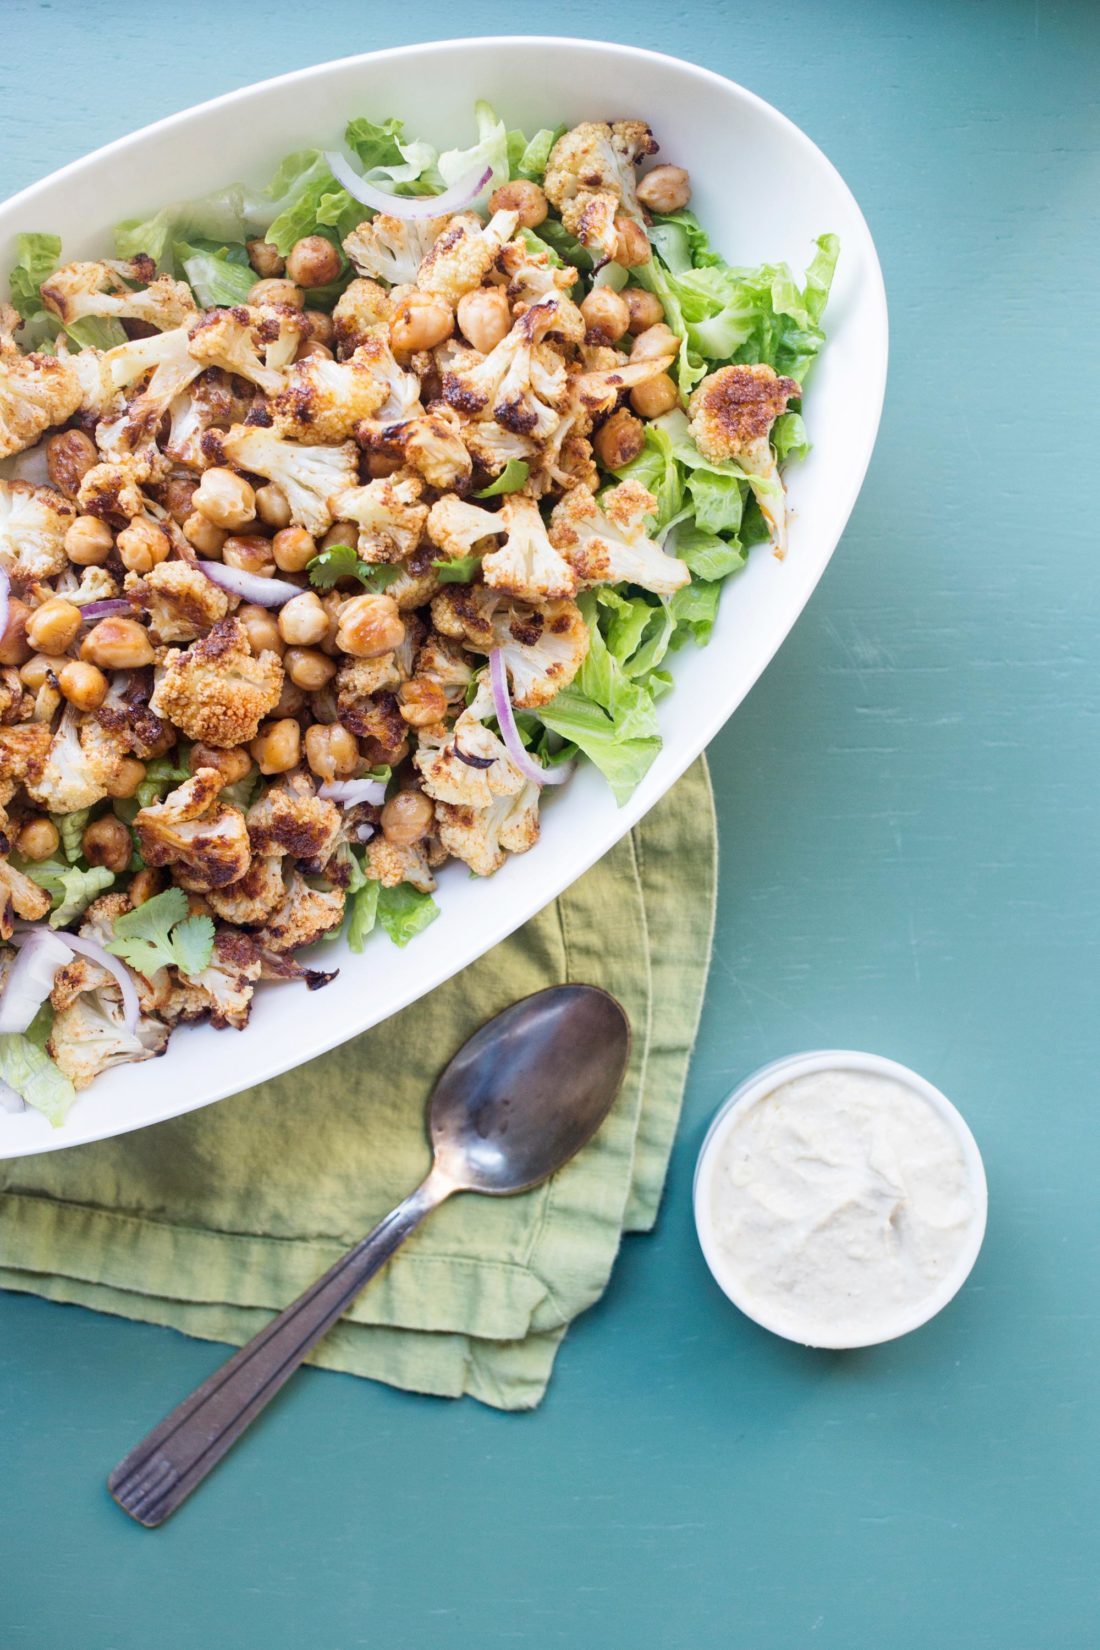 Small bowl of Tahini Dressing next to a plate of Roasted Cauliflower and Chickpea Salad.